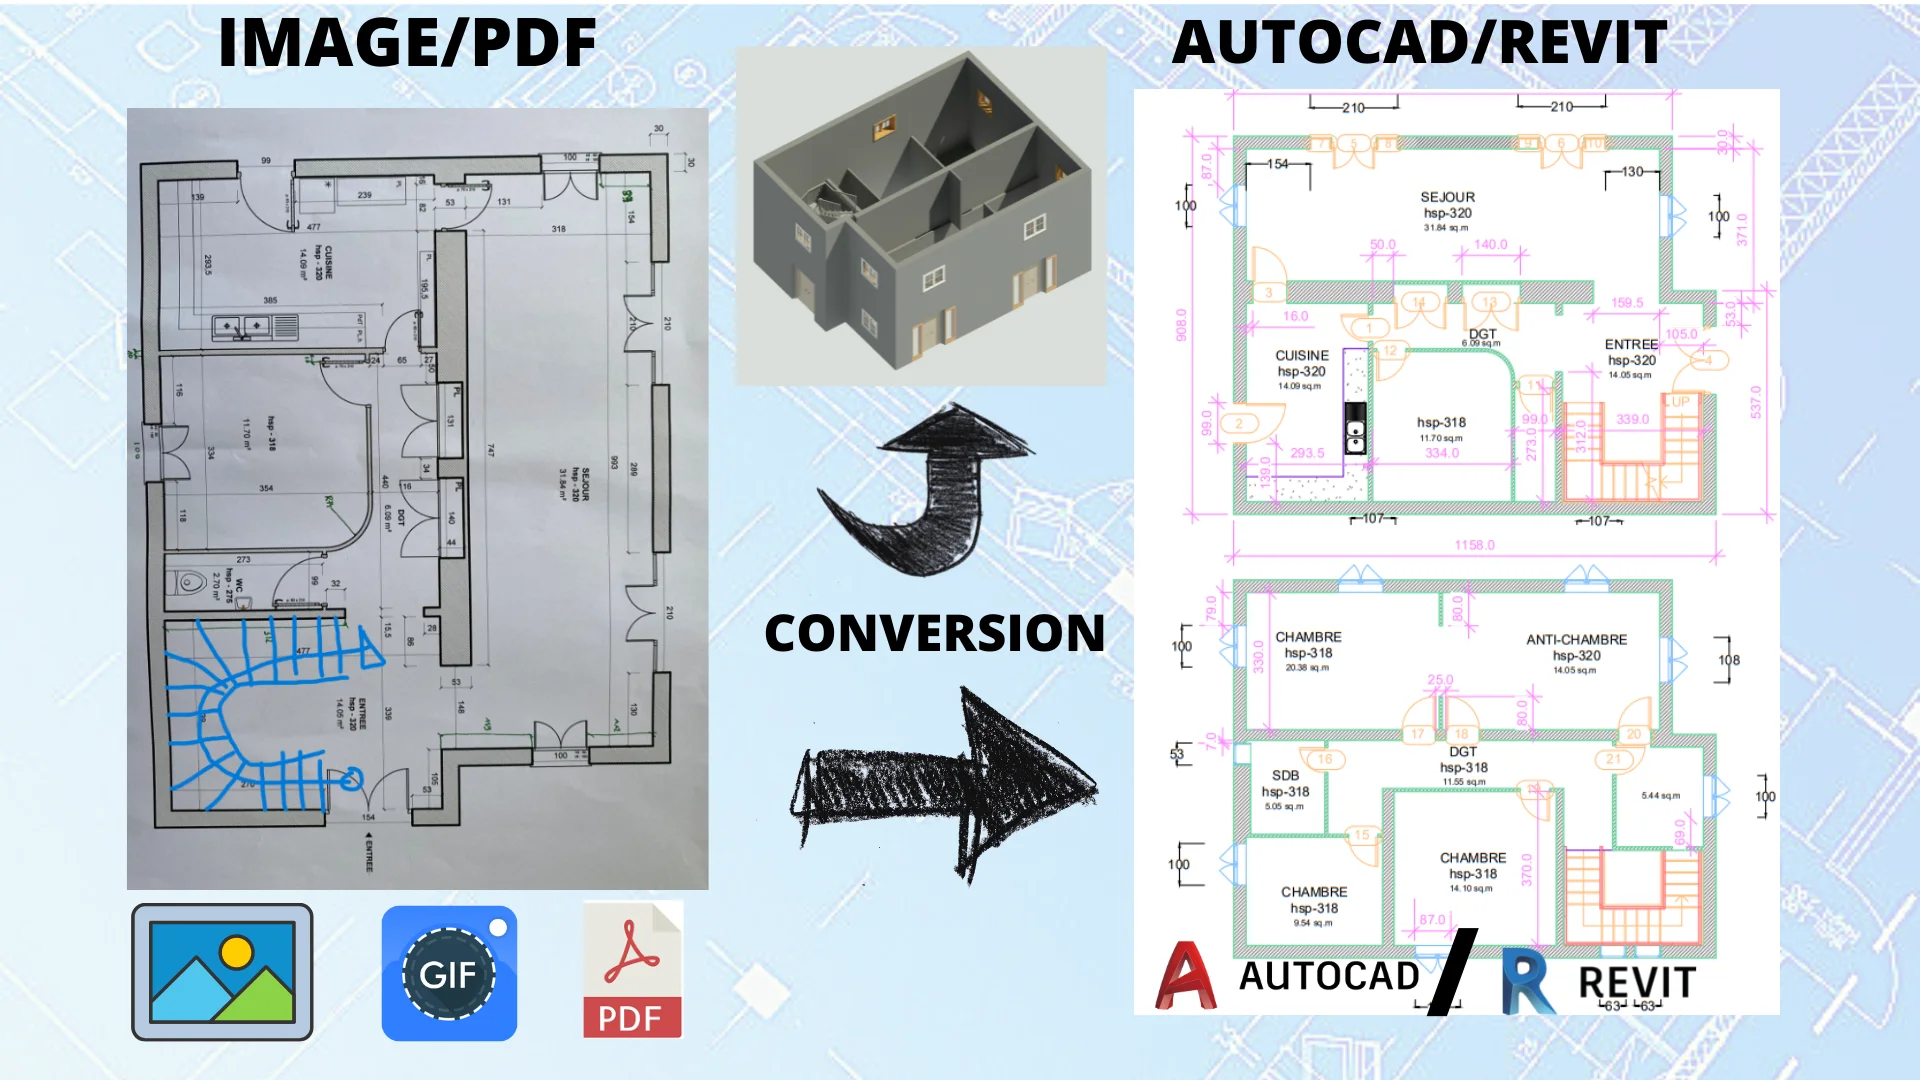 Autocad mechanical practice drawings pdf free Download